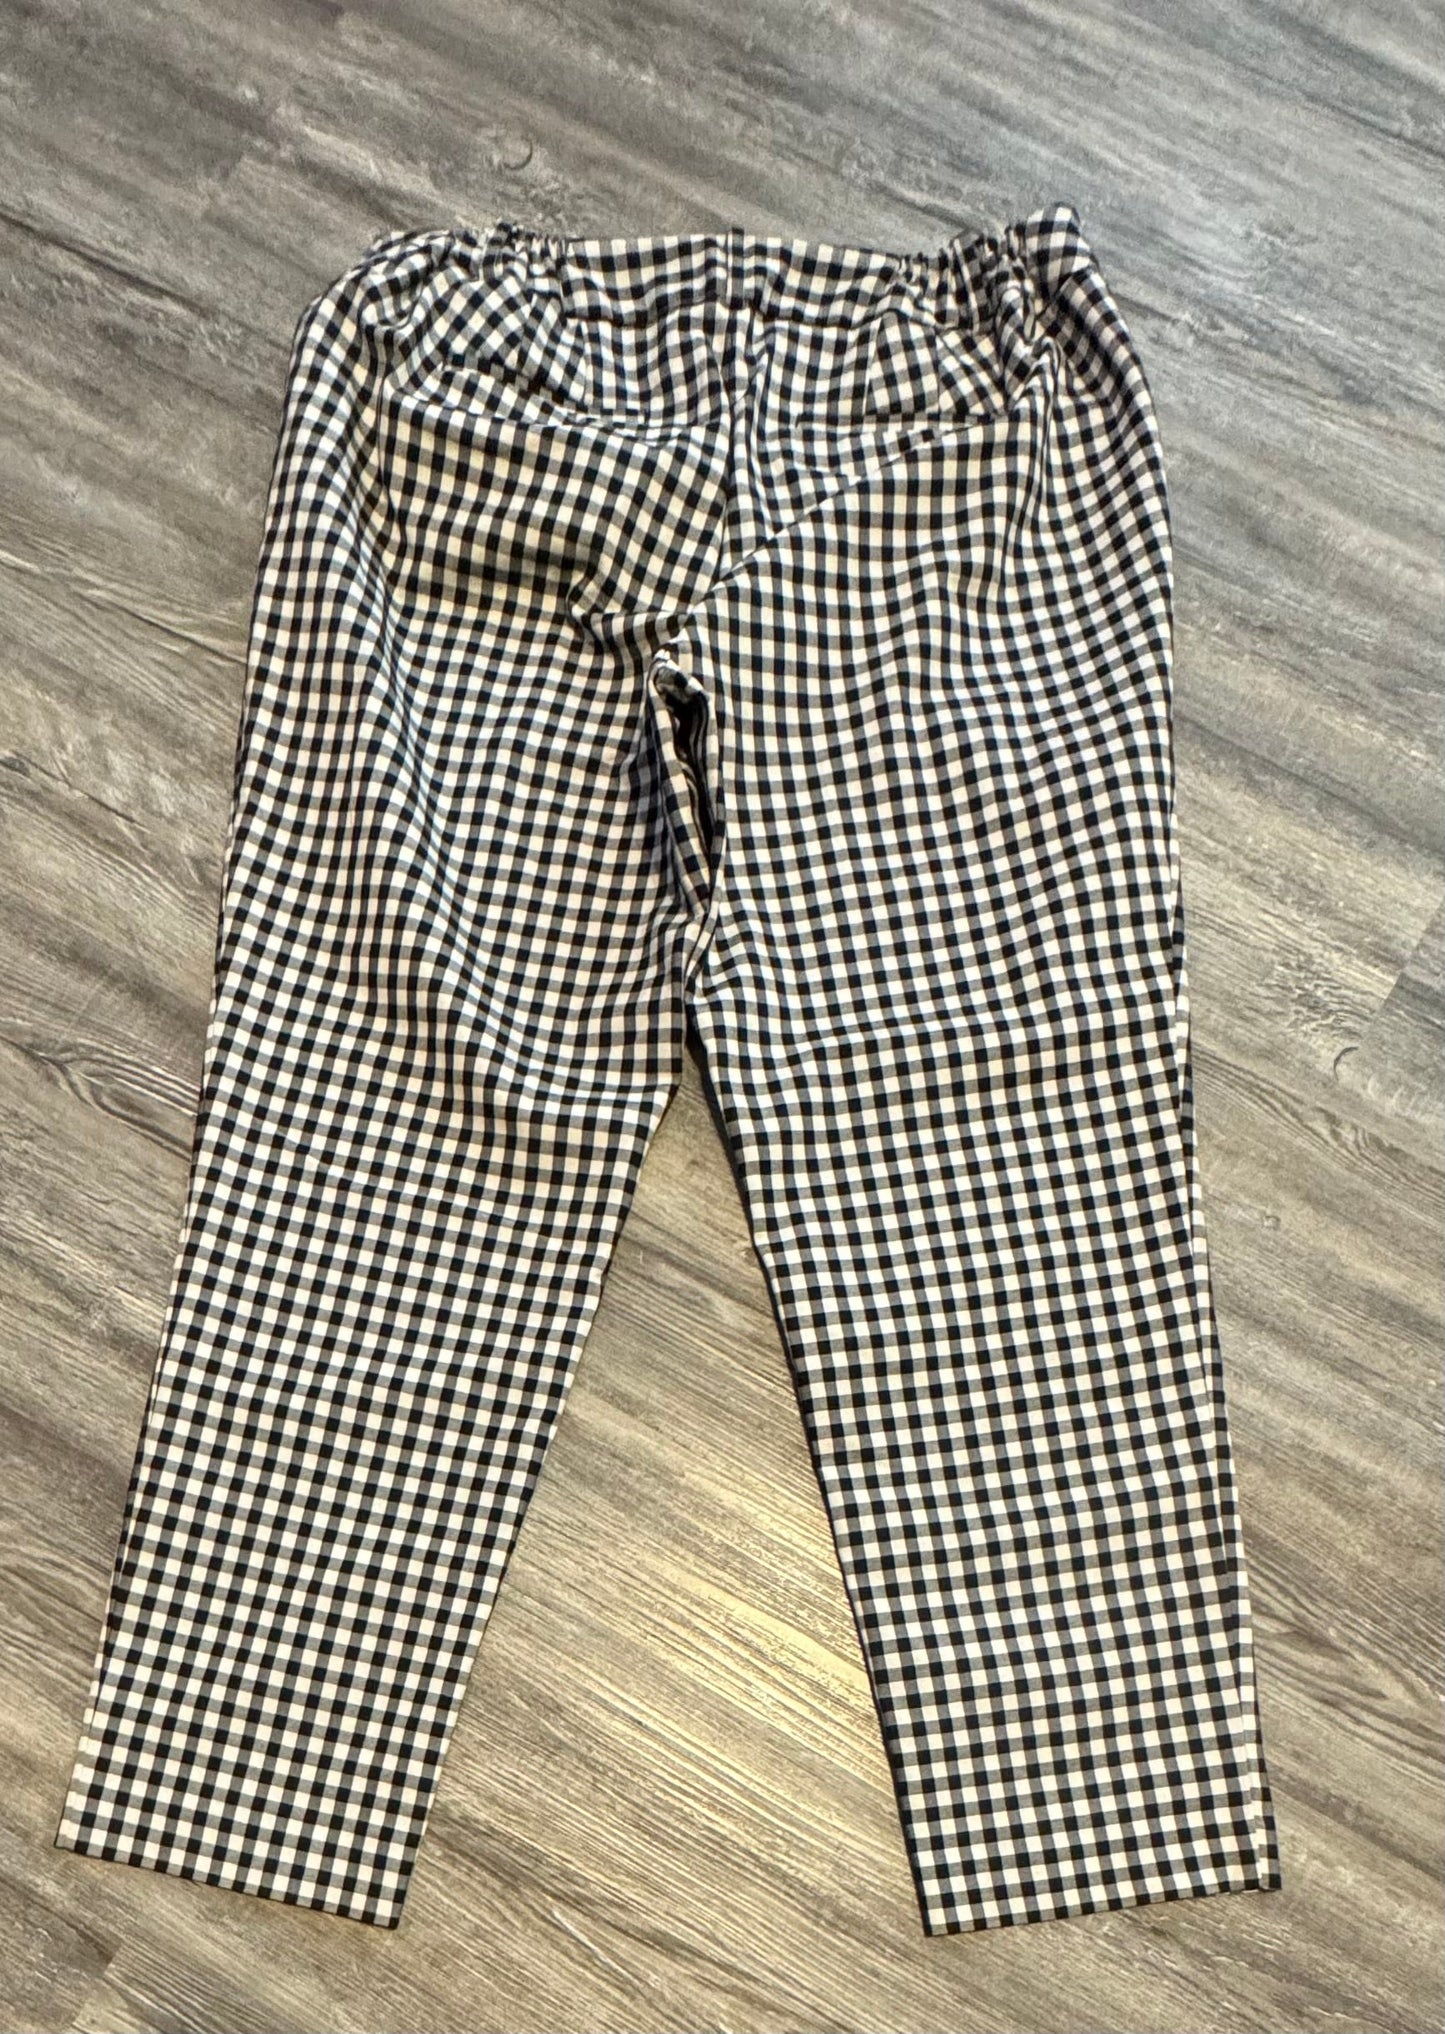 Pants Other By Talbots  Size: 16